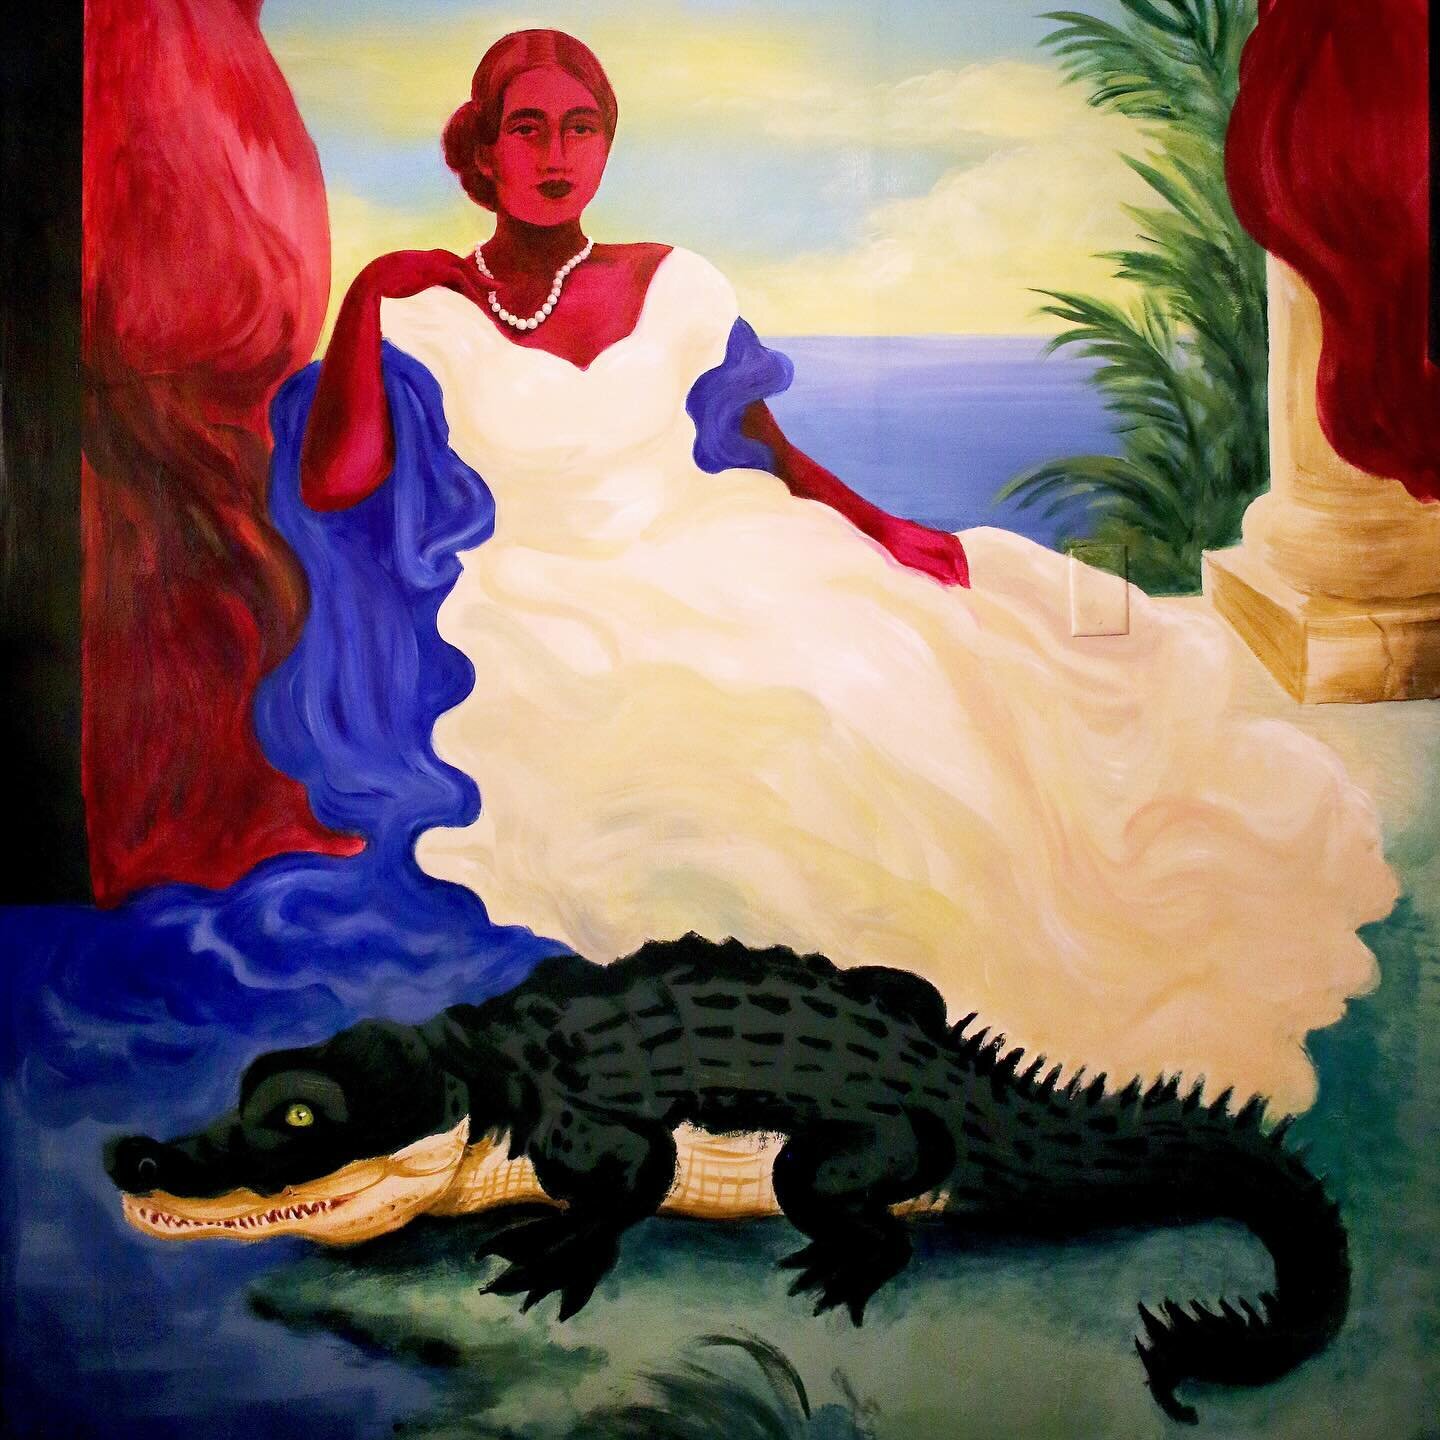 Part II of my hallway mural at @chameleonspokane ~ Princess with Crocodilia 🐊 inspired by this painting I saw at the @gettymuseum (last slide) 

#mural #muralpainting #muralist #painting #arthistory